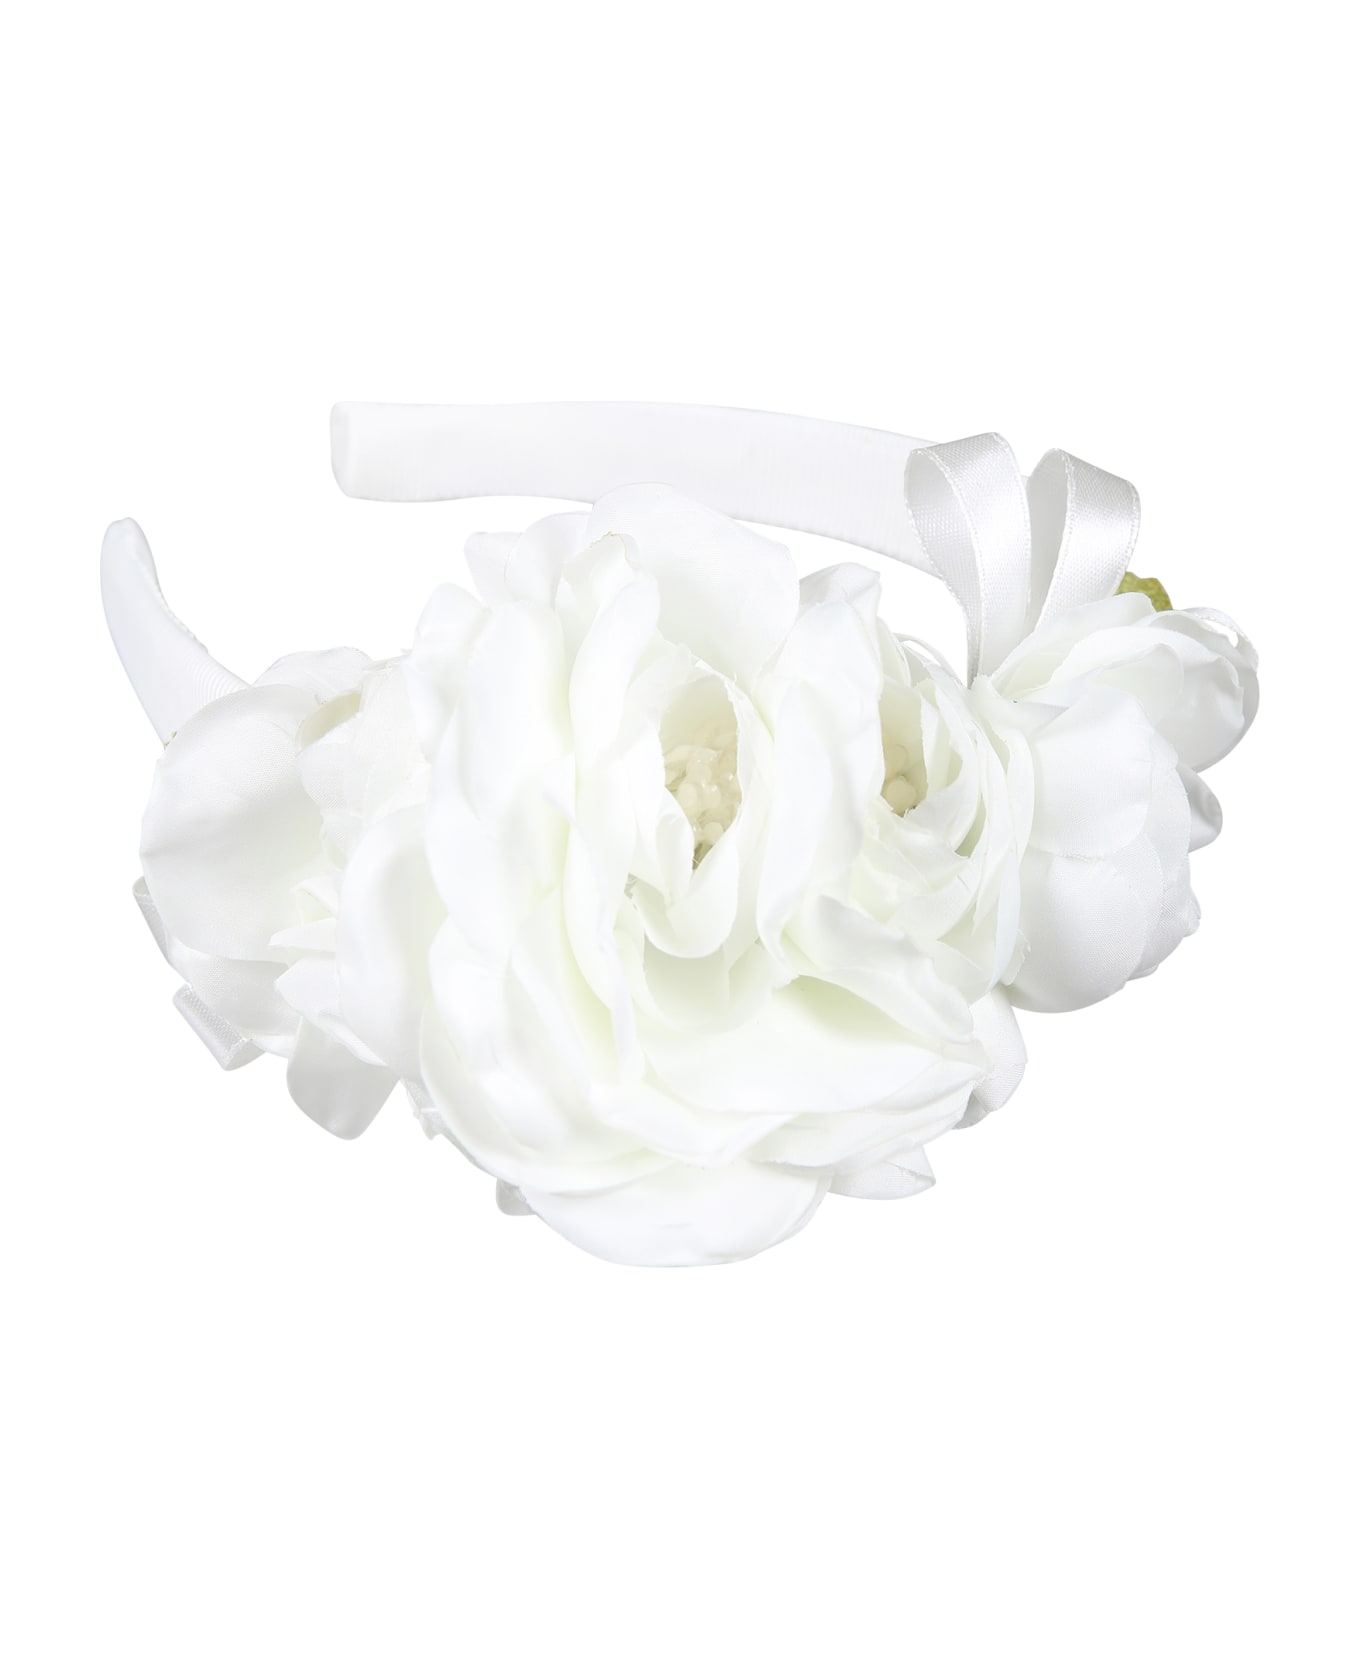 Monnalisa White Headband For Girl With Flowers - White アクセサリー＆ギフト